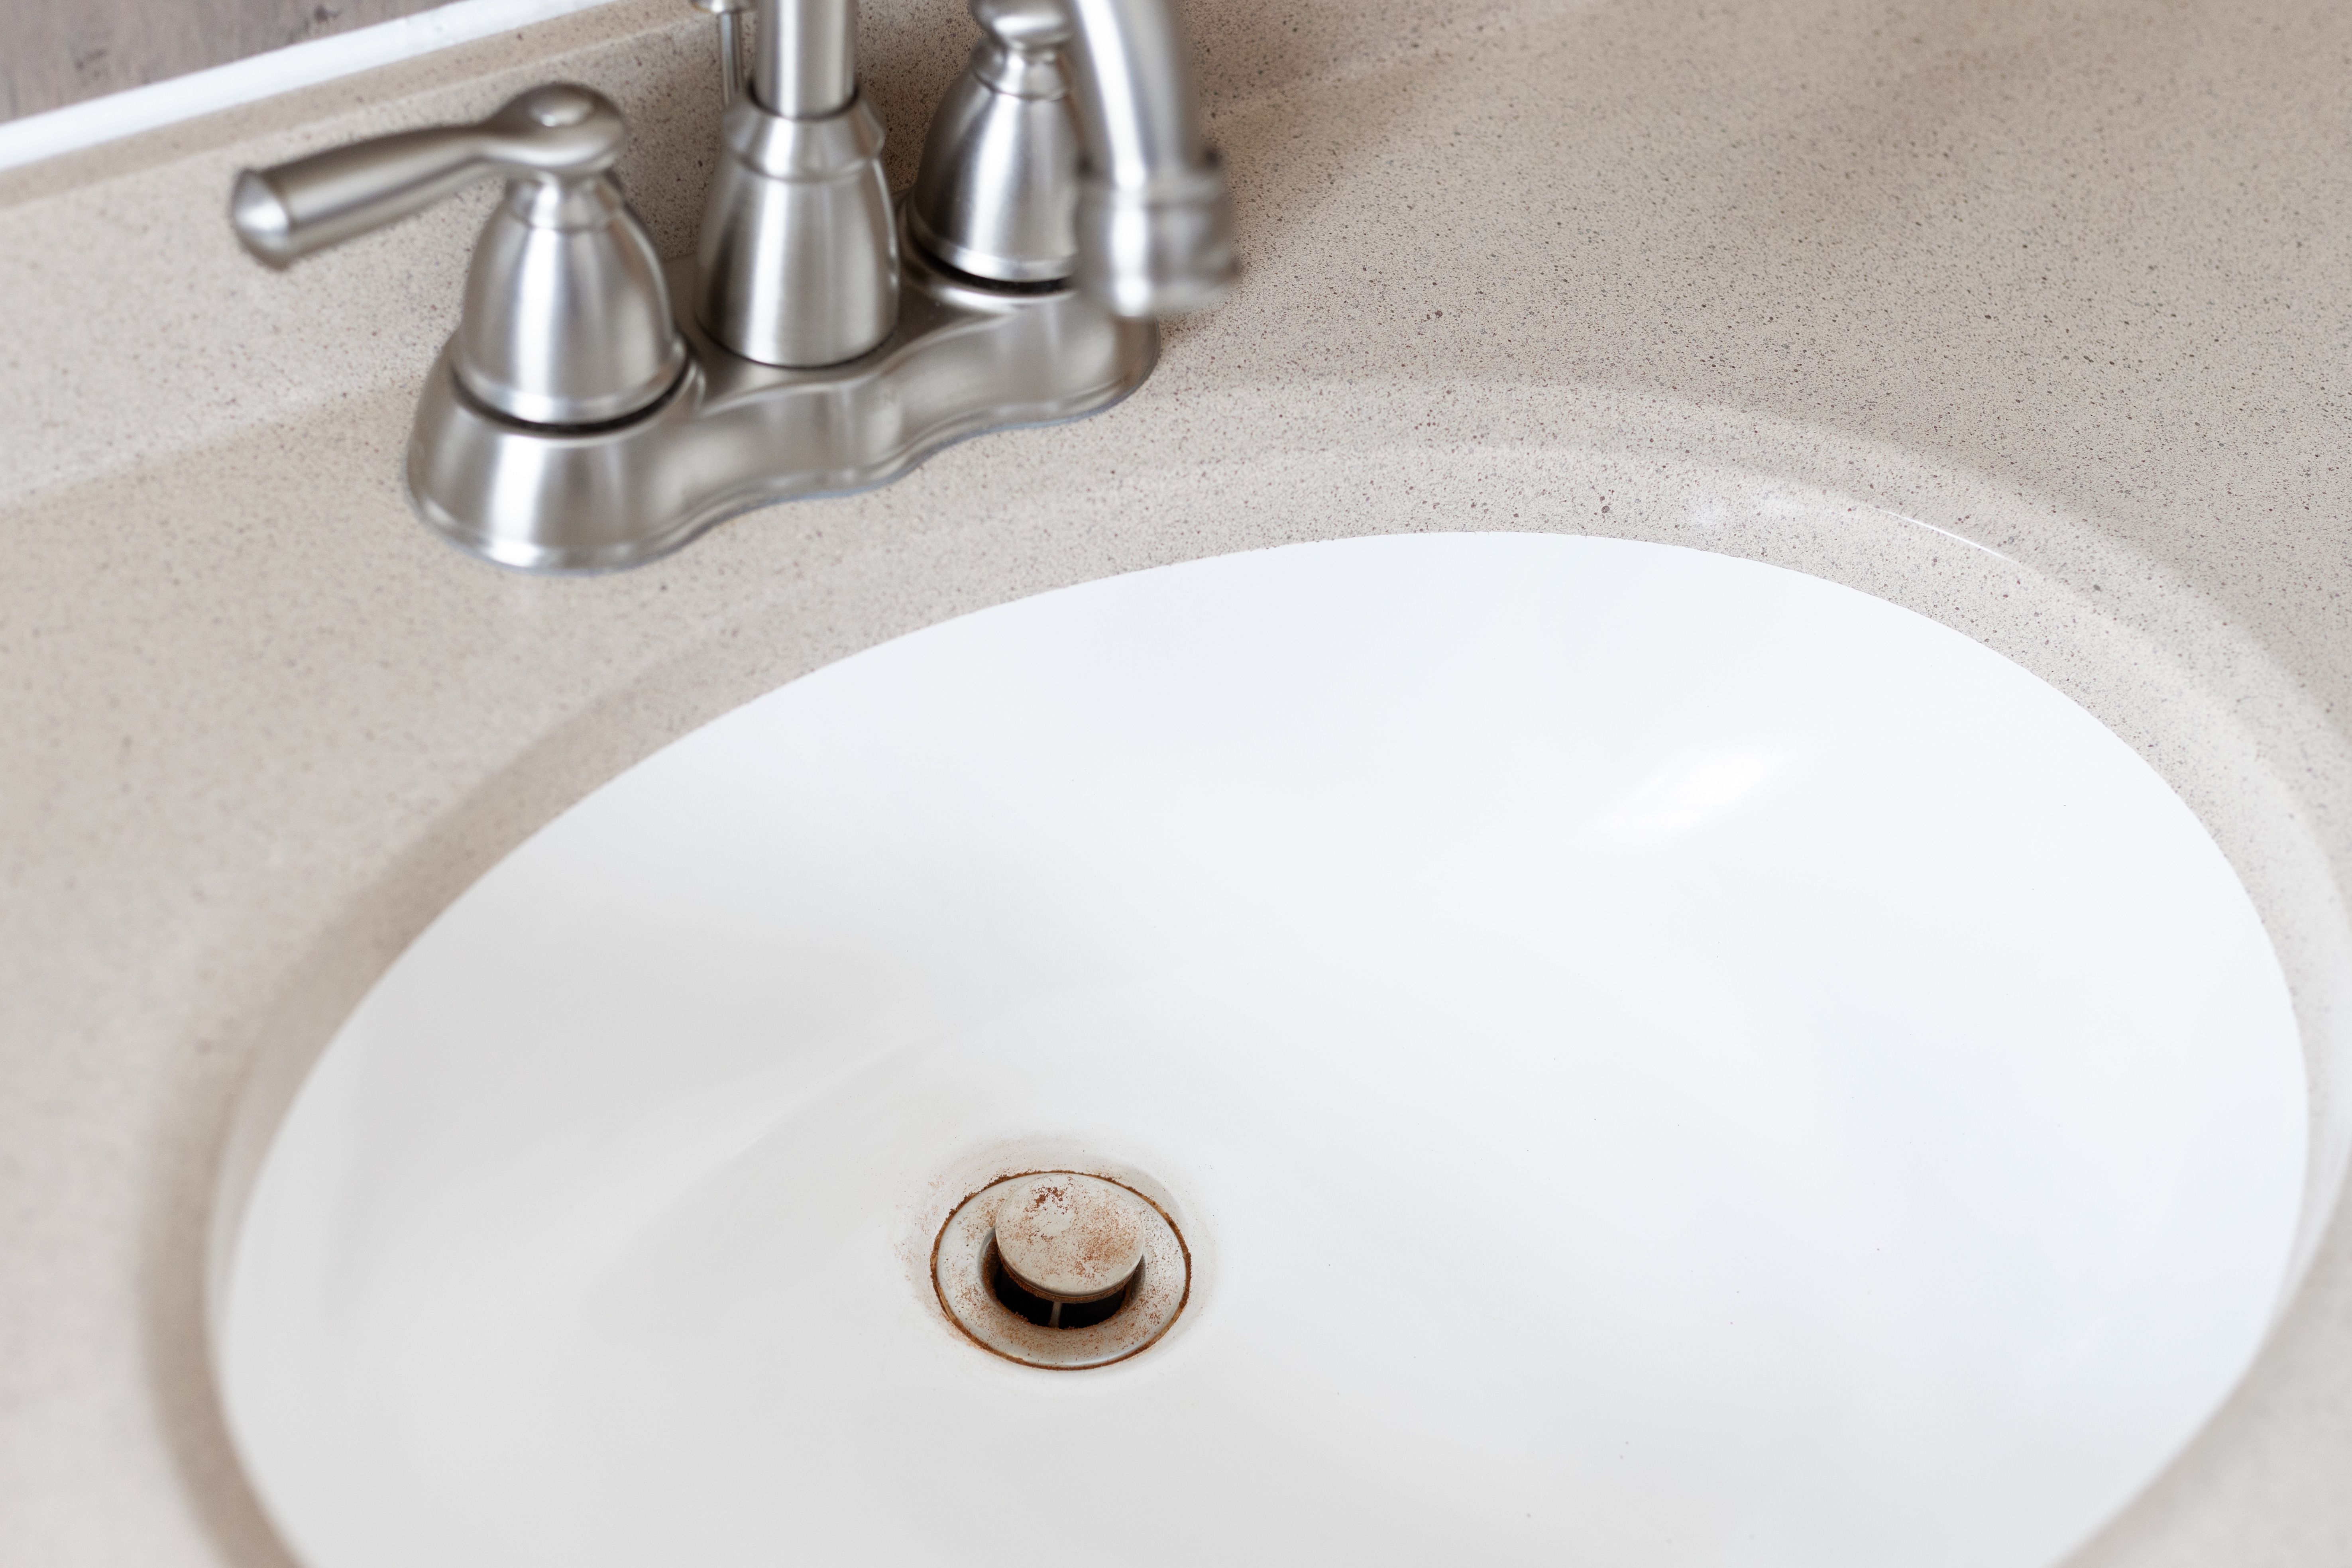 How to Remove Rust Stains From Toilets, Tubs, and Sinks